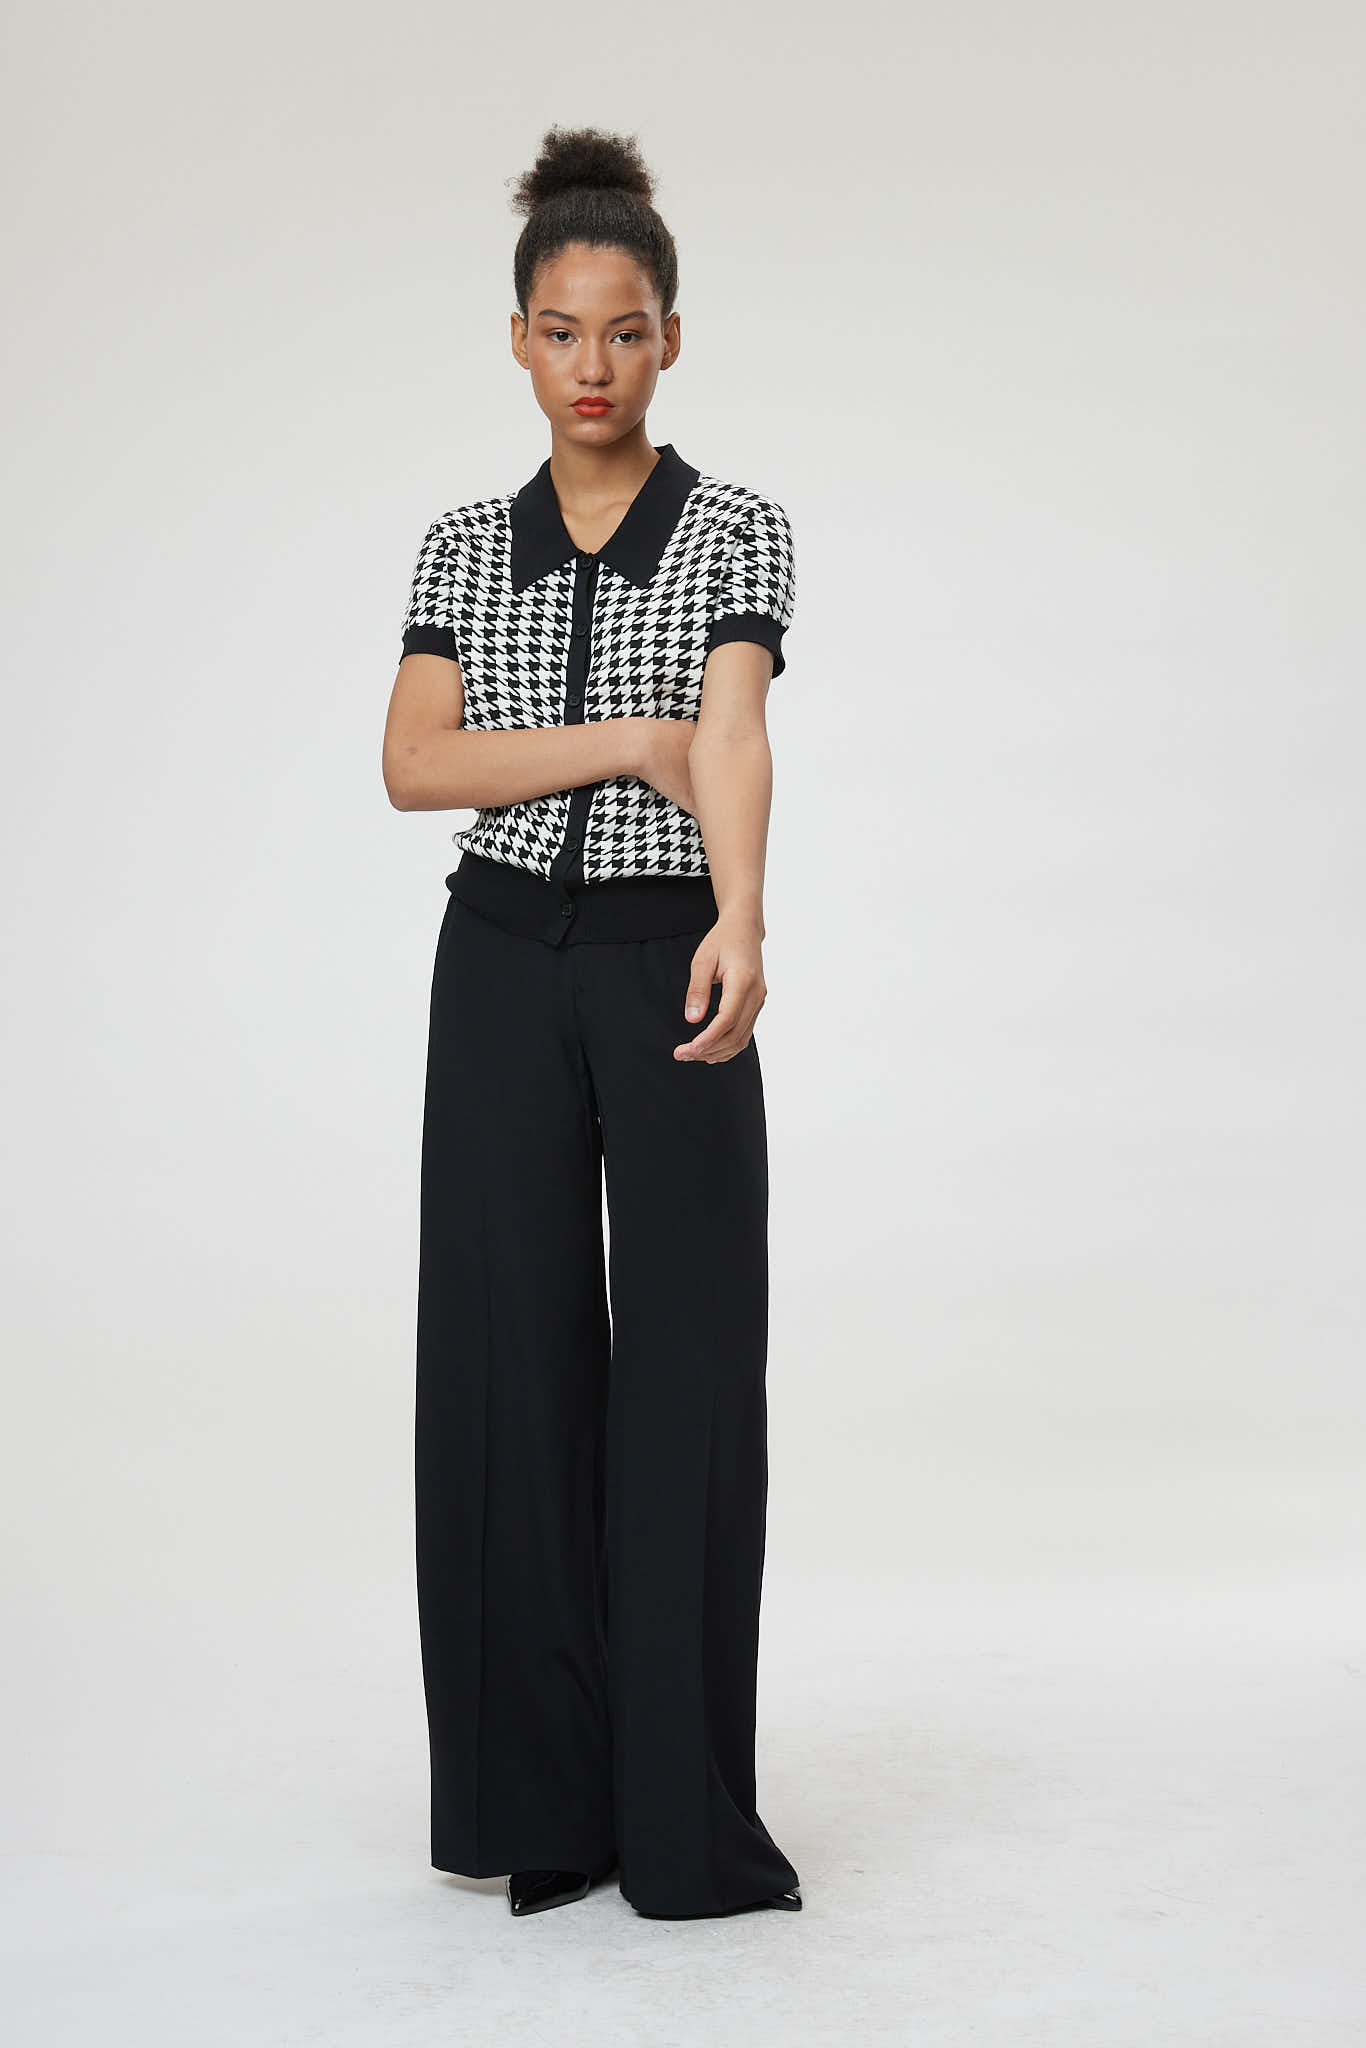 Vicenza Cardigan – Button down blouse in black and white dogtooth